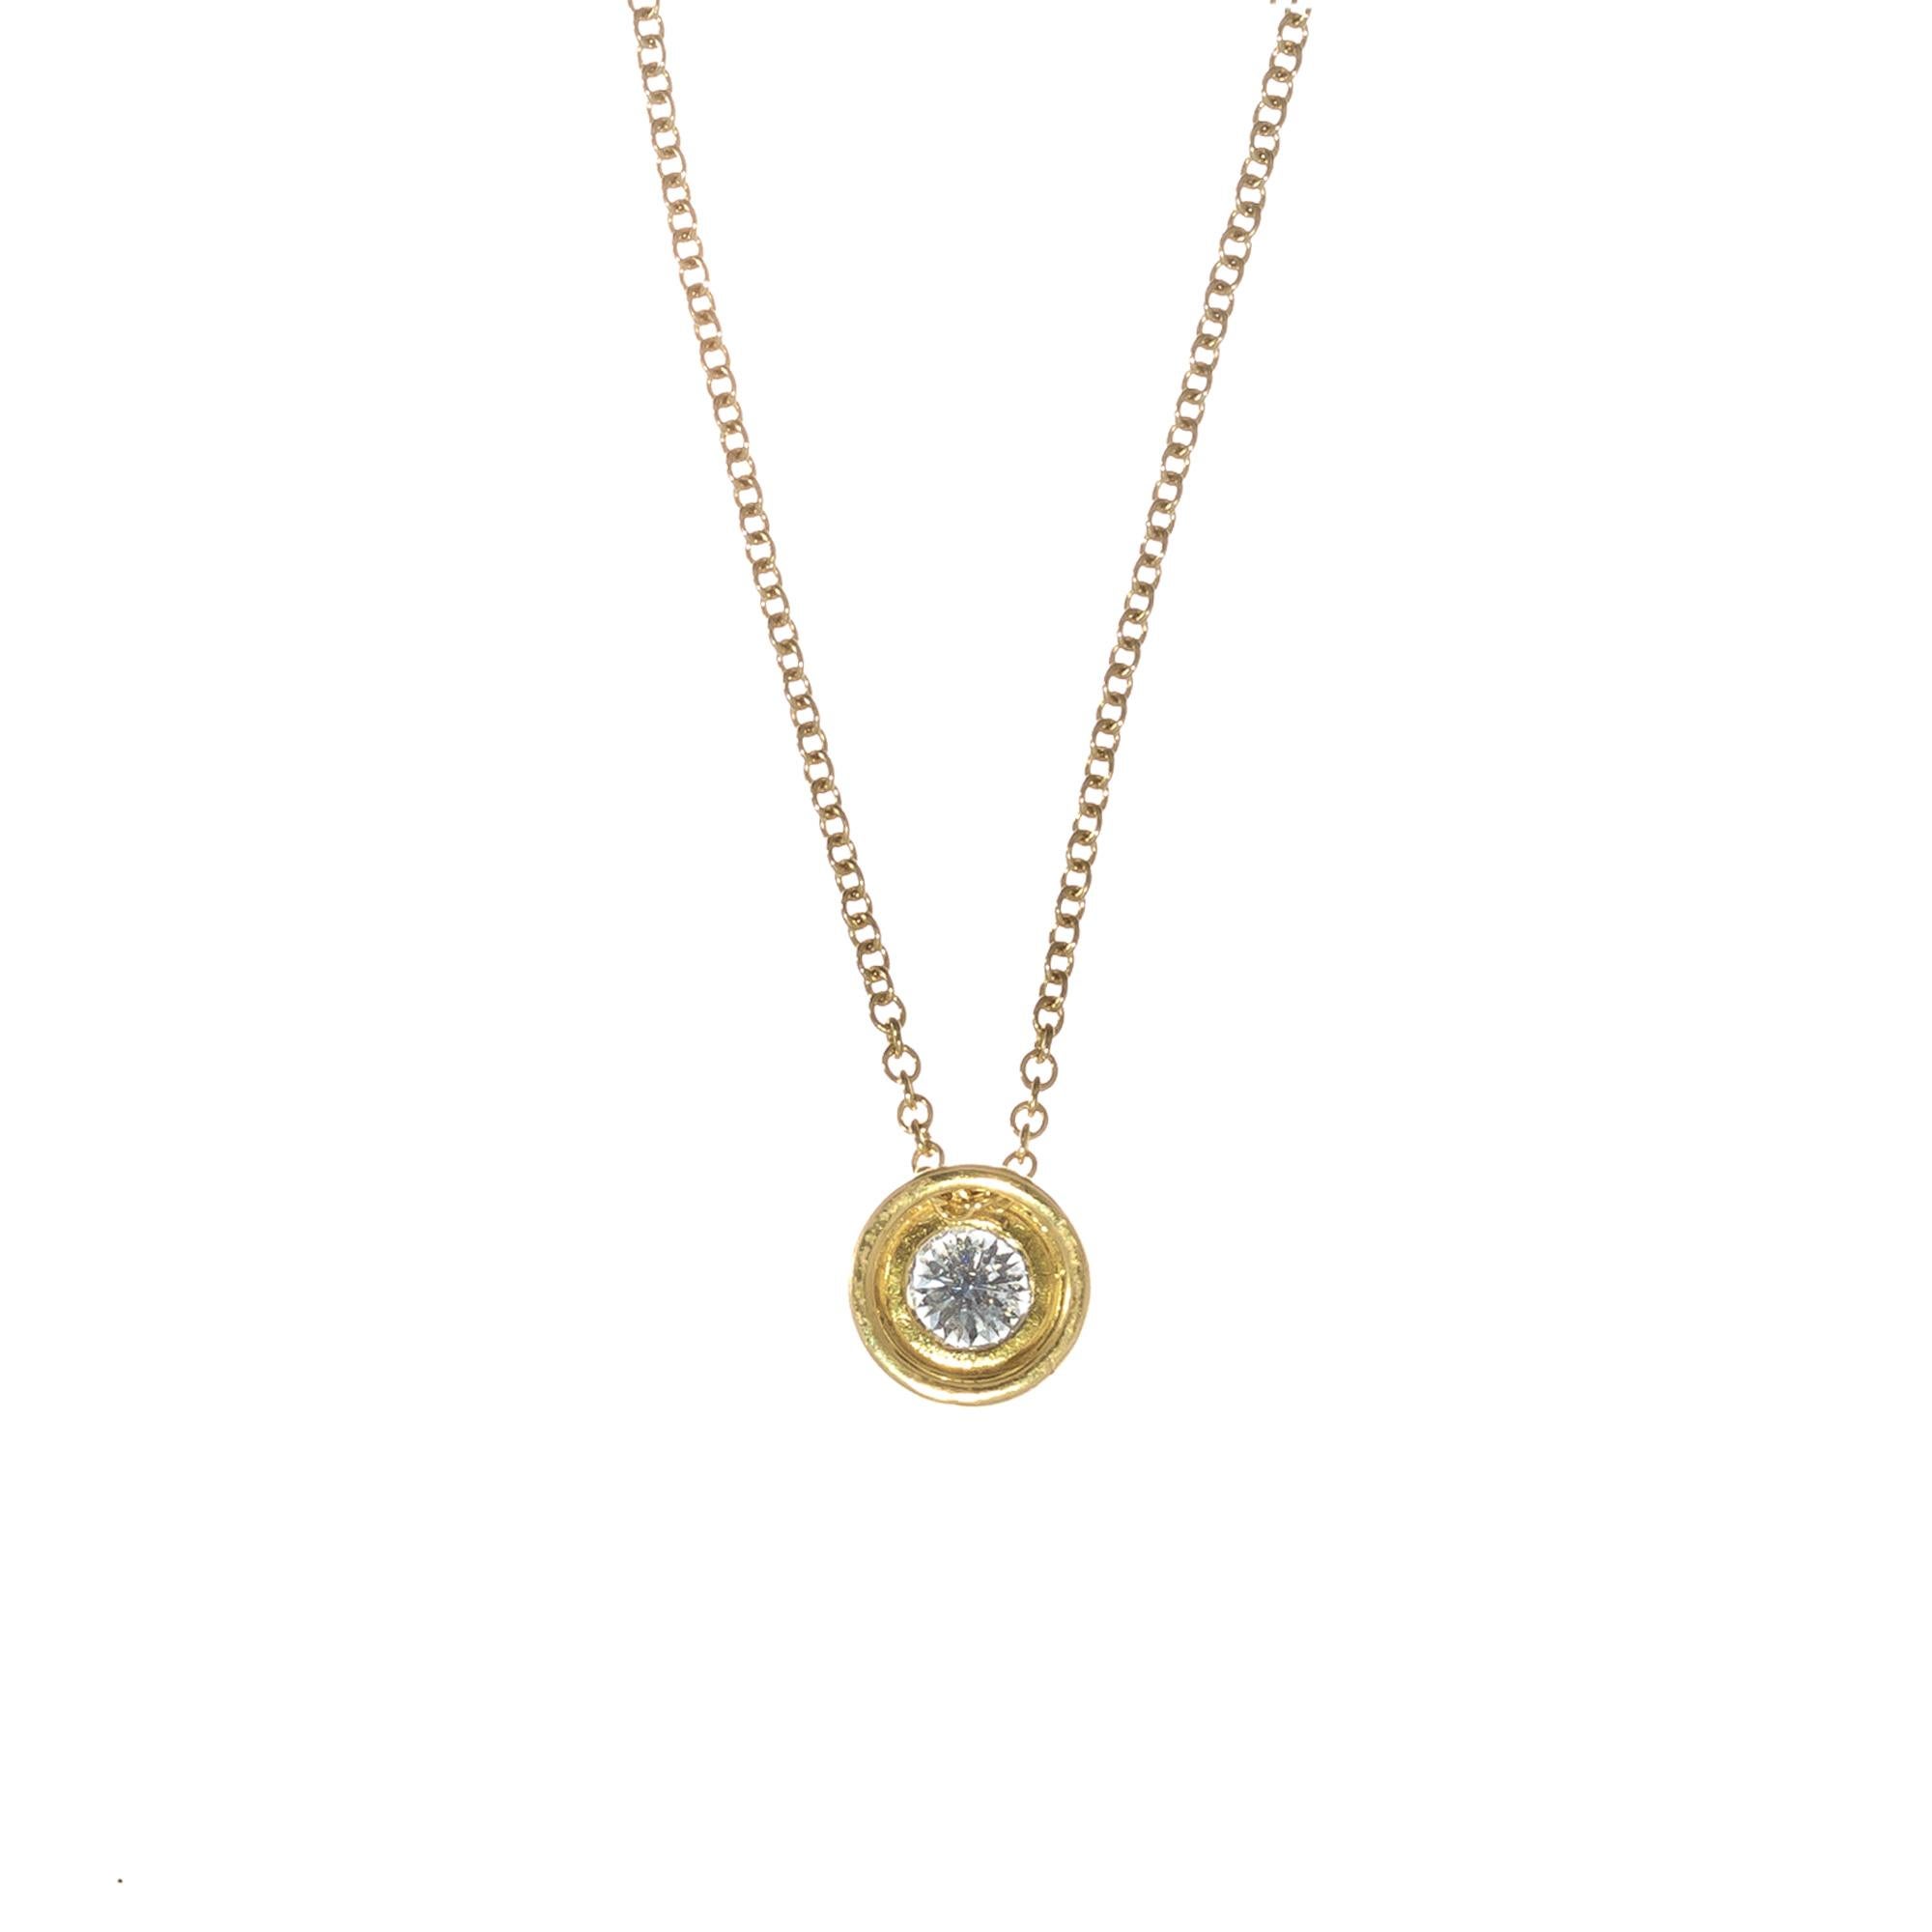 EGL certified 0.55 carat diamond bezel set slide pendant in 18k yellow gold.

1 round brilliant cut diamond G-H SI, approx. .55ct
18k yellow gold 
Stamped: 750 18k
4.8 grams
Chain: 18 Inches
Width: 9mm
Thickness/depth: 4.9mm

